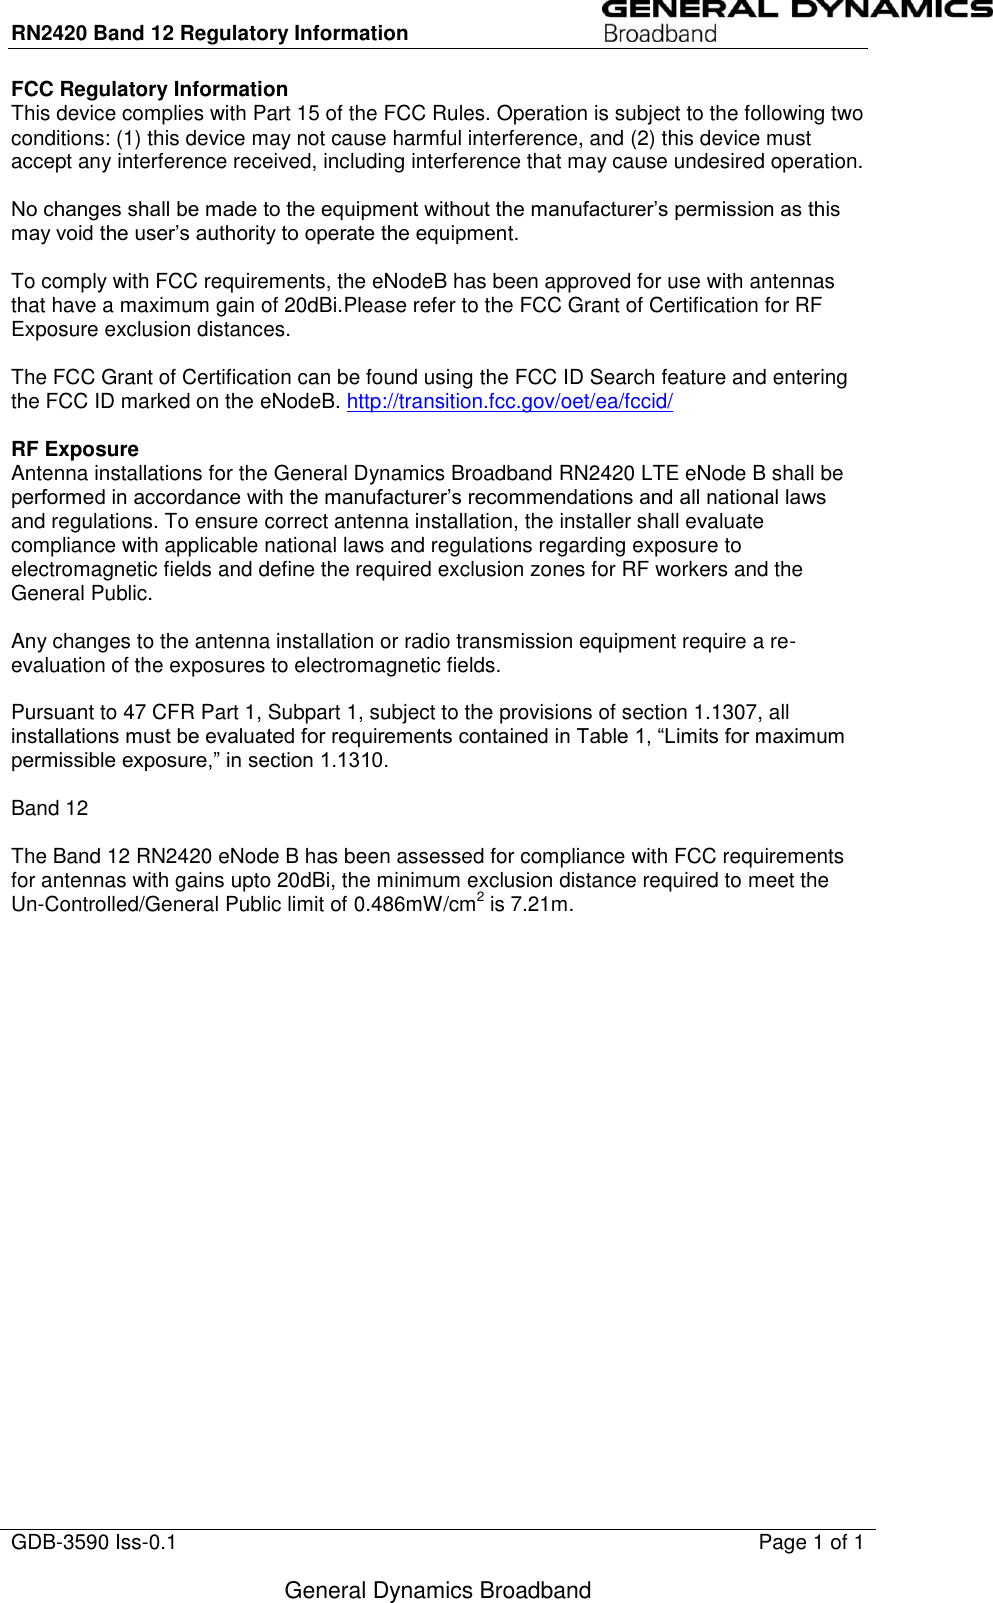 RN2420 Band 12 Regulatory Information                                GDB-3590 Iss-0.1  Page 1 of 1  General Dynamics Broadband FCC Regulatory Information This device complies with Part 15 of the FCC Rules. Operation is subject to the following two conditions: (1) this device may not cause harmful interference, and (2) this device must accept any interference received, including interference that may cause undesired operation.  No changes shall be made to the equipment without the manufacturer’s permission as this may void the user’s authority to operate the equipment.  To comply with FCC requirements, the eNodeB has been approved for use with antennas that have a maximum gain of 20dBi.Please refer to the FCC Grant of Certification for RF Exposure exclusion distances.  The FCC Grant of Certification can be found using the FCC ID Search feature and entering the FCC ID marked on the eNodeB. http://transition.fcc.gov/oet/ea/fccid/   RF Exposure Antenna installations for the General Dynamics Broadband RN2420 LTE eNode B shall be performed in accordance with the manufacturer’s recommendations and all national laws and regulations. To ensure correct antenna installation, the installer shall evaluate compliance with applicable national laws and regulations regarding exposure to electromagnetic fields and define the required exclusion zones for RF workers and the General Public.  Any changes to the antenna installation or radio transmission equipment require a re-evaluation of the exposures to electromagnetic fields.  Pursuant to 47 CFR Part 1, Subpart 1, subject to the provisions of section 1.1307, all installations must be evaluated for requirements contained in Table 1, “Limits for maximum permissible exposure,” in section 1.1310.  Band 12  The Band 12 RN2420 eNode B has been assessed for compliance with FCC requirements for antennas with gains upto 20dBi, the minimum exclusion distance required to meet the Un-Controlled/General Public limit of 0.486mW/cm2 is 7.21m.   